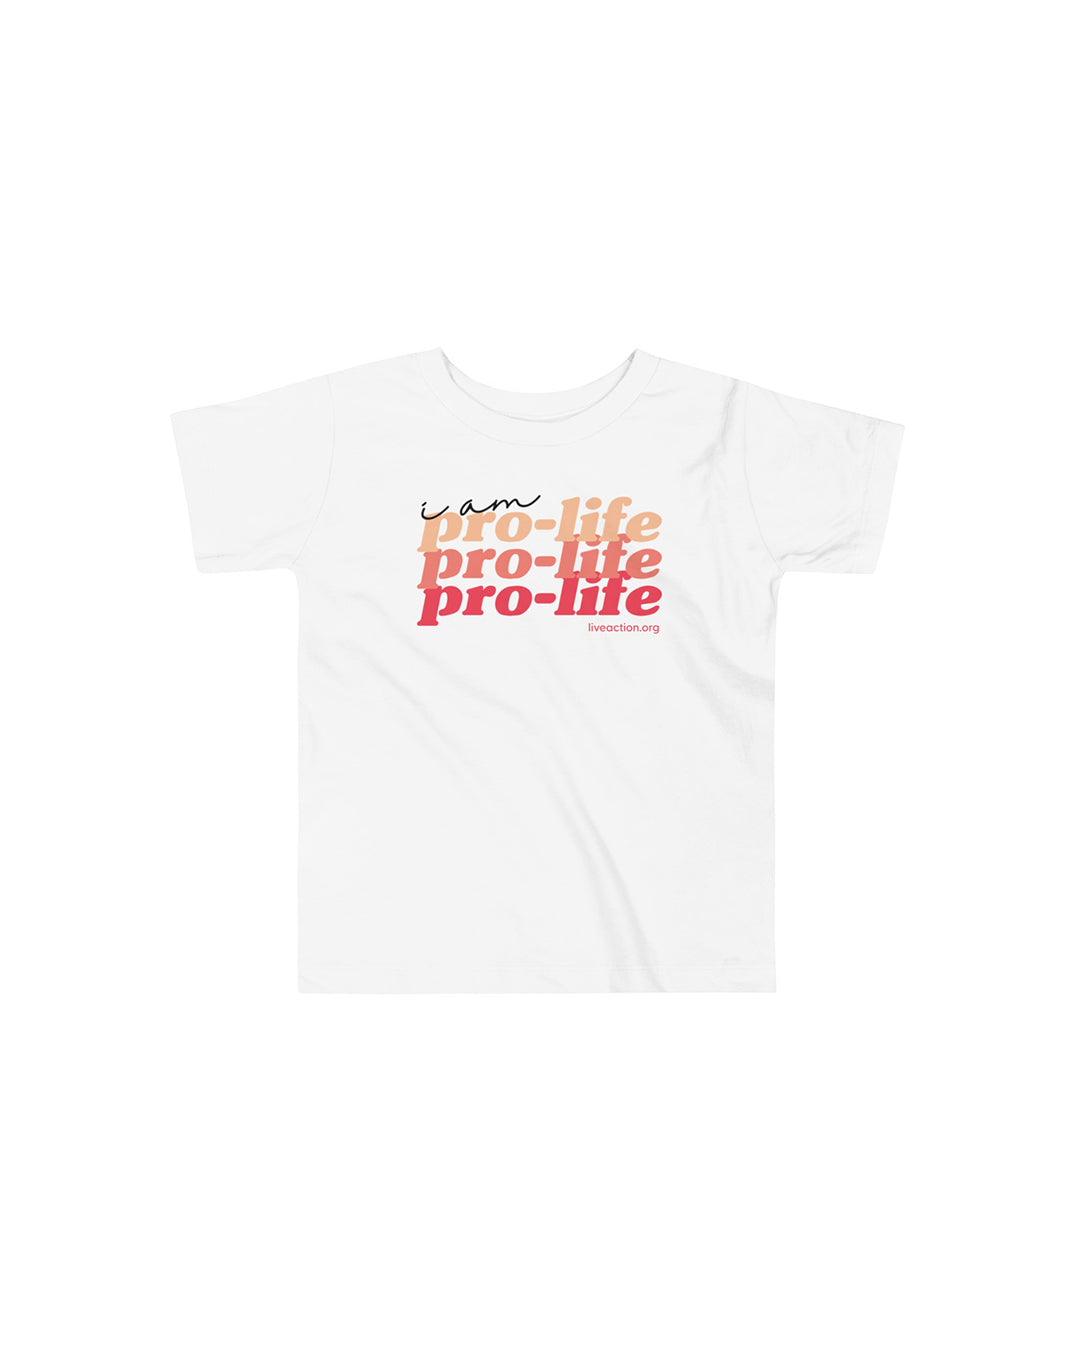 Pro-Life Toddler Tee in Red